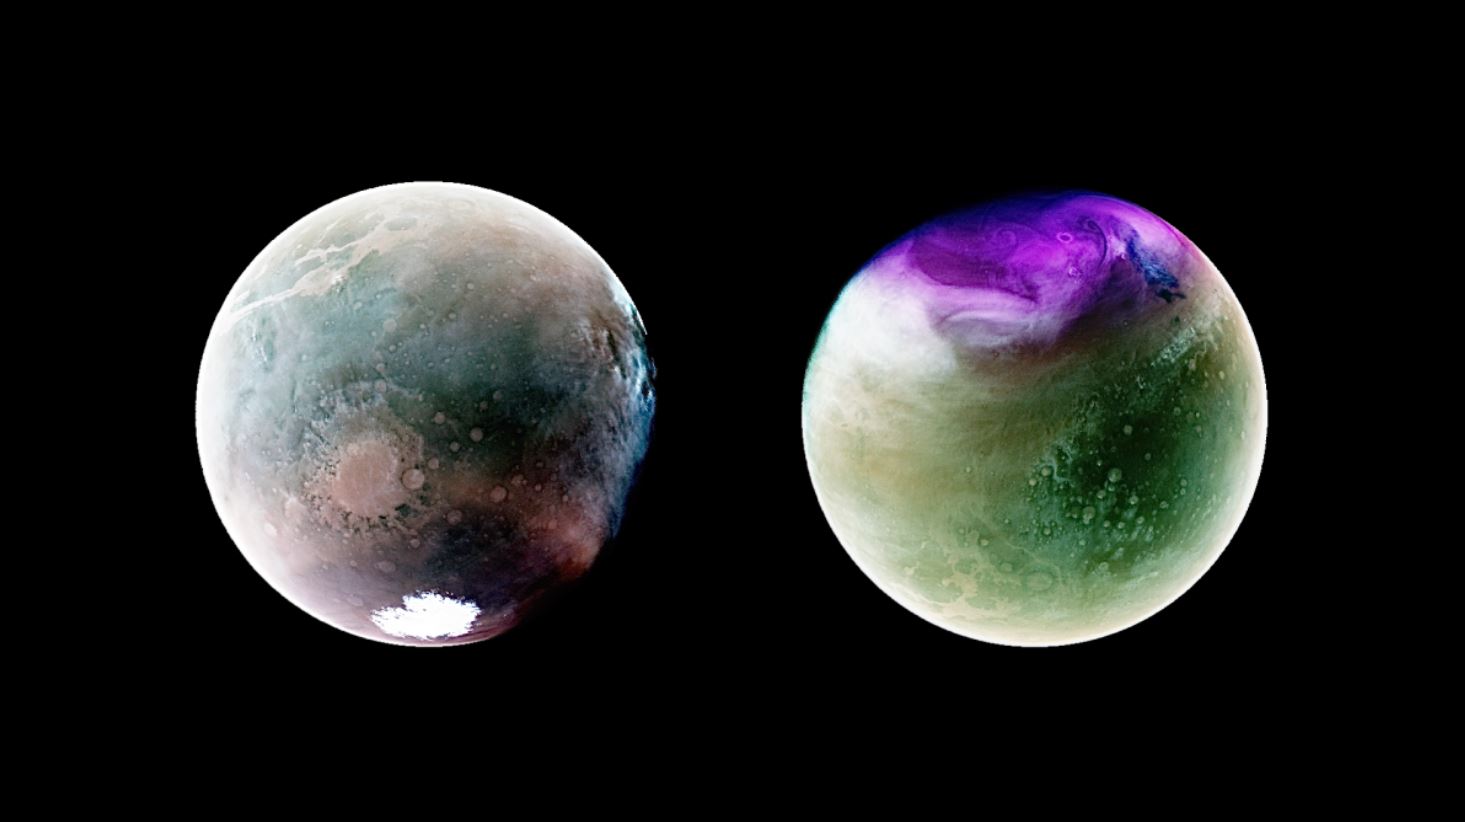 Unprecedented Glimpse of Mars: NASA’s Stunning Ultraviolet Photos Reveal the Red Planet’s Beauty